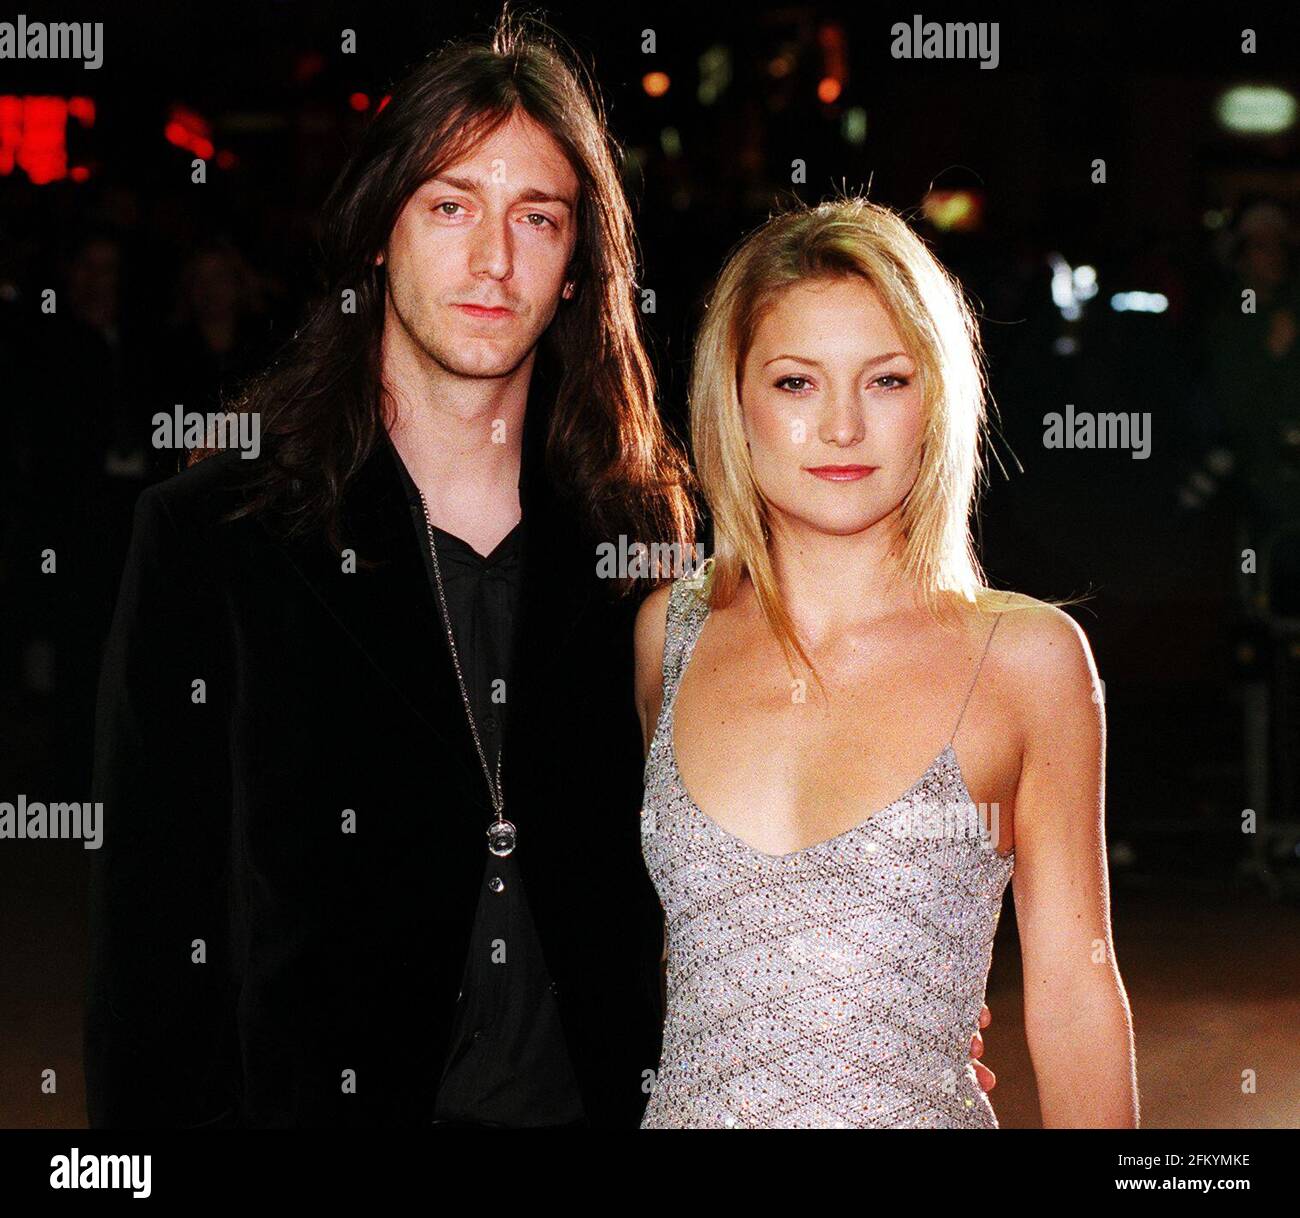 *** LEGAL WARNING - KATE HUDSON MADE LEGAL COMPLAINT AGAINST ARTICLES SUGGESTING SHE HAS EATING DISORDER. CONTACT LEGAL DEPARTMENT. 8 November 2005*** KATE HUDSON  NOVEMBER 2000ACTRESS OF THE FILM 'ALMOST FAMOUS' ARRIVING AT THE PREMIERE AT LEICESTER SQ. THIS EVENING WITH HER ROCK BOYFRIEND CHRIS ROBINSON FROM THE BLACK CROWES Stock Photo